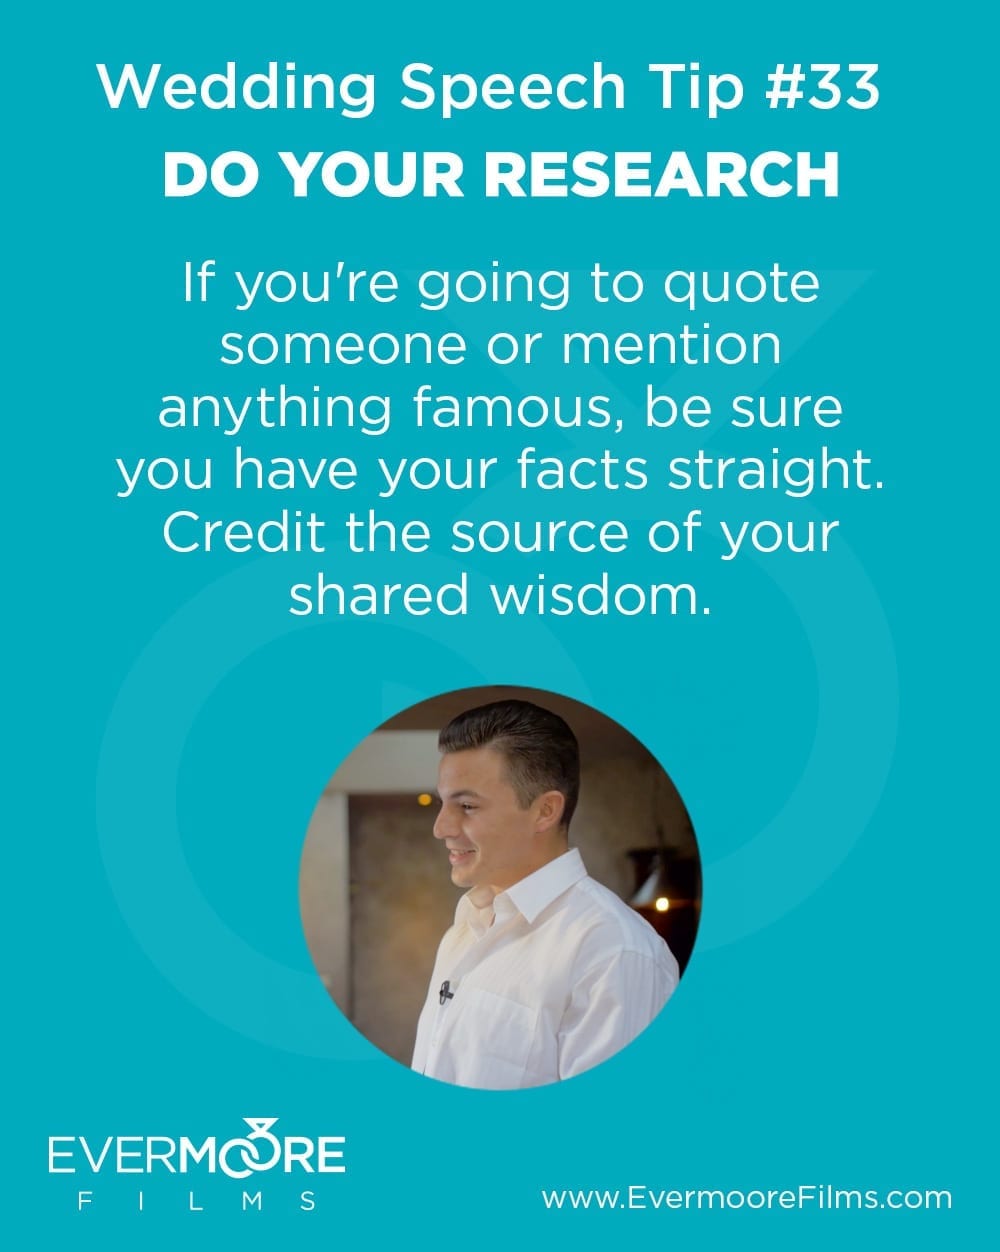 Do Your Research | Wedding Speech Tip #33 | Evermoore Films | If you're going to quote someone or mention anything famous, be sure you have your facts straight. Credit the source of your shared wisdom.